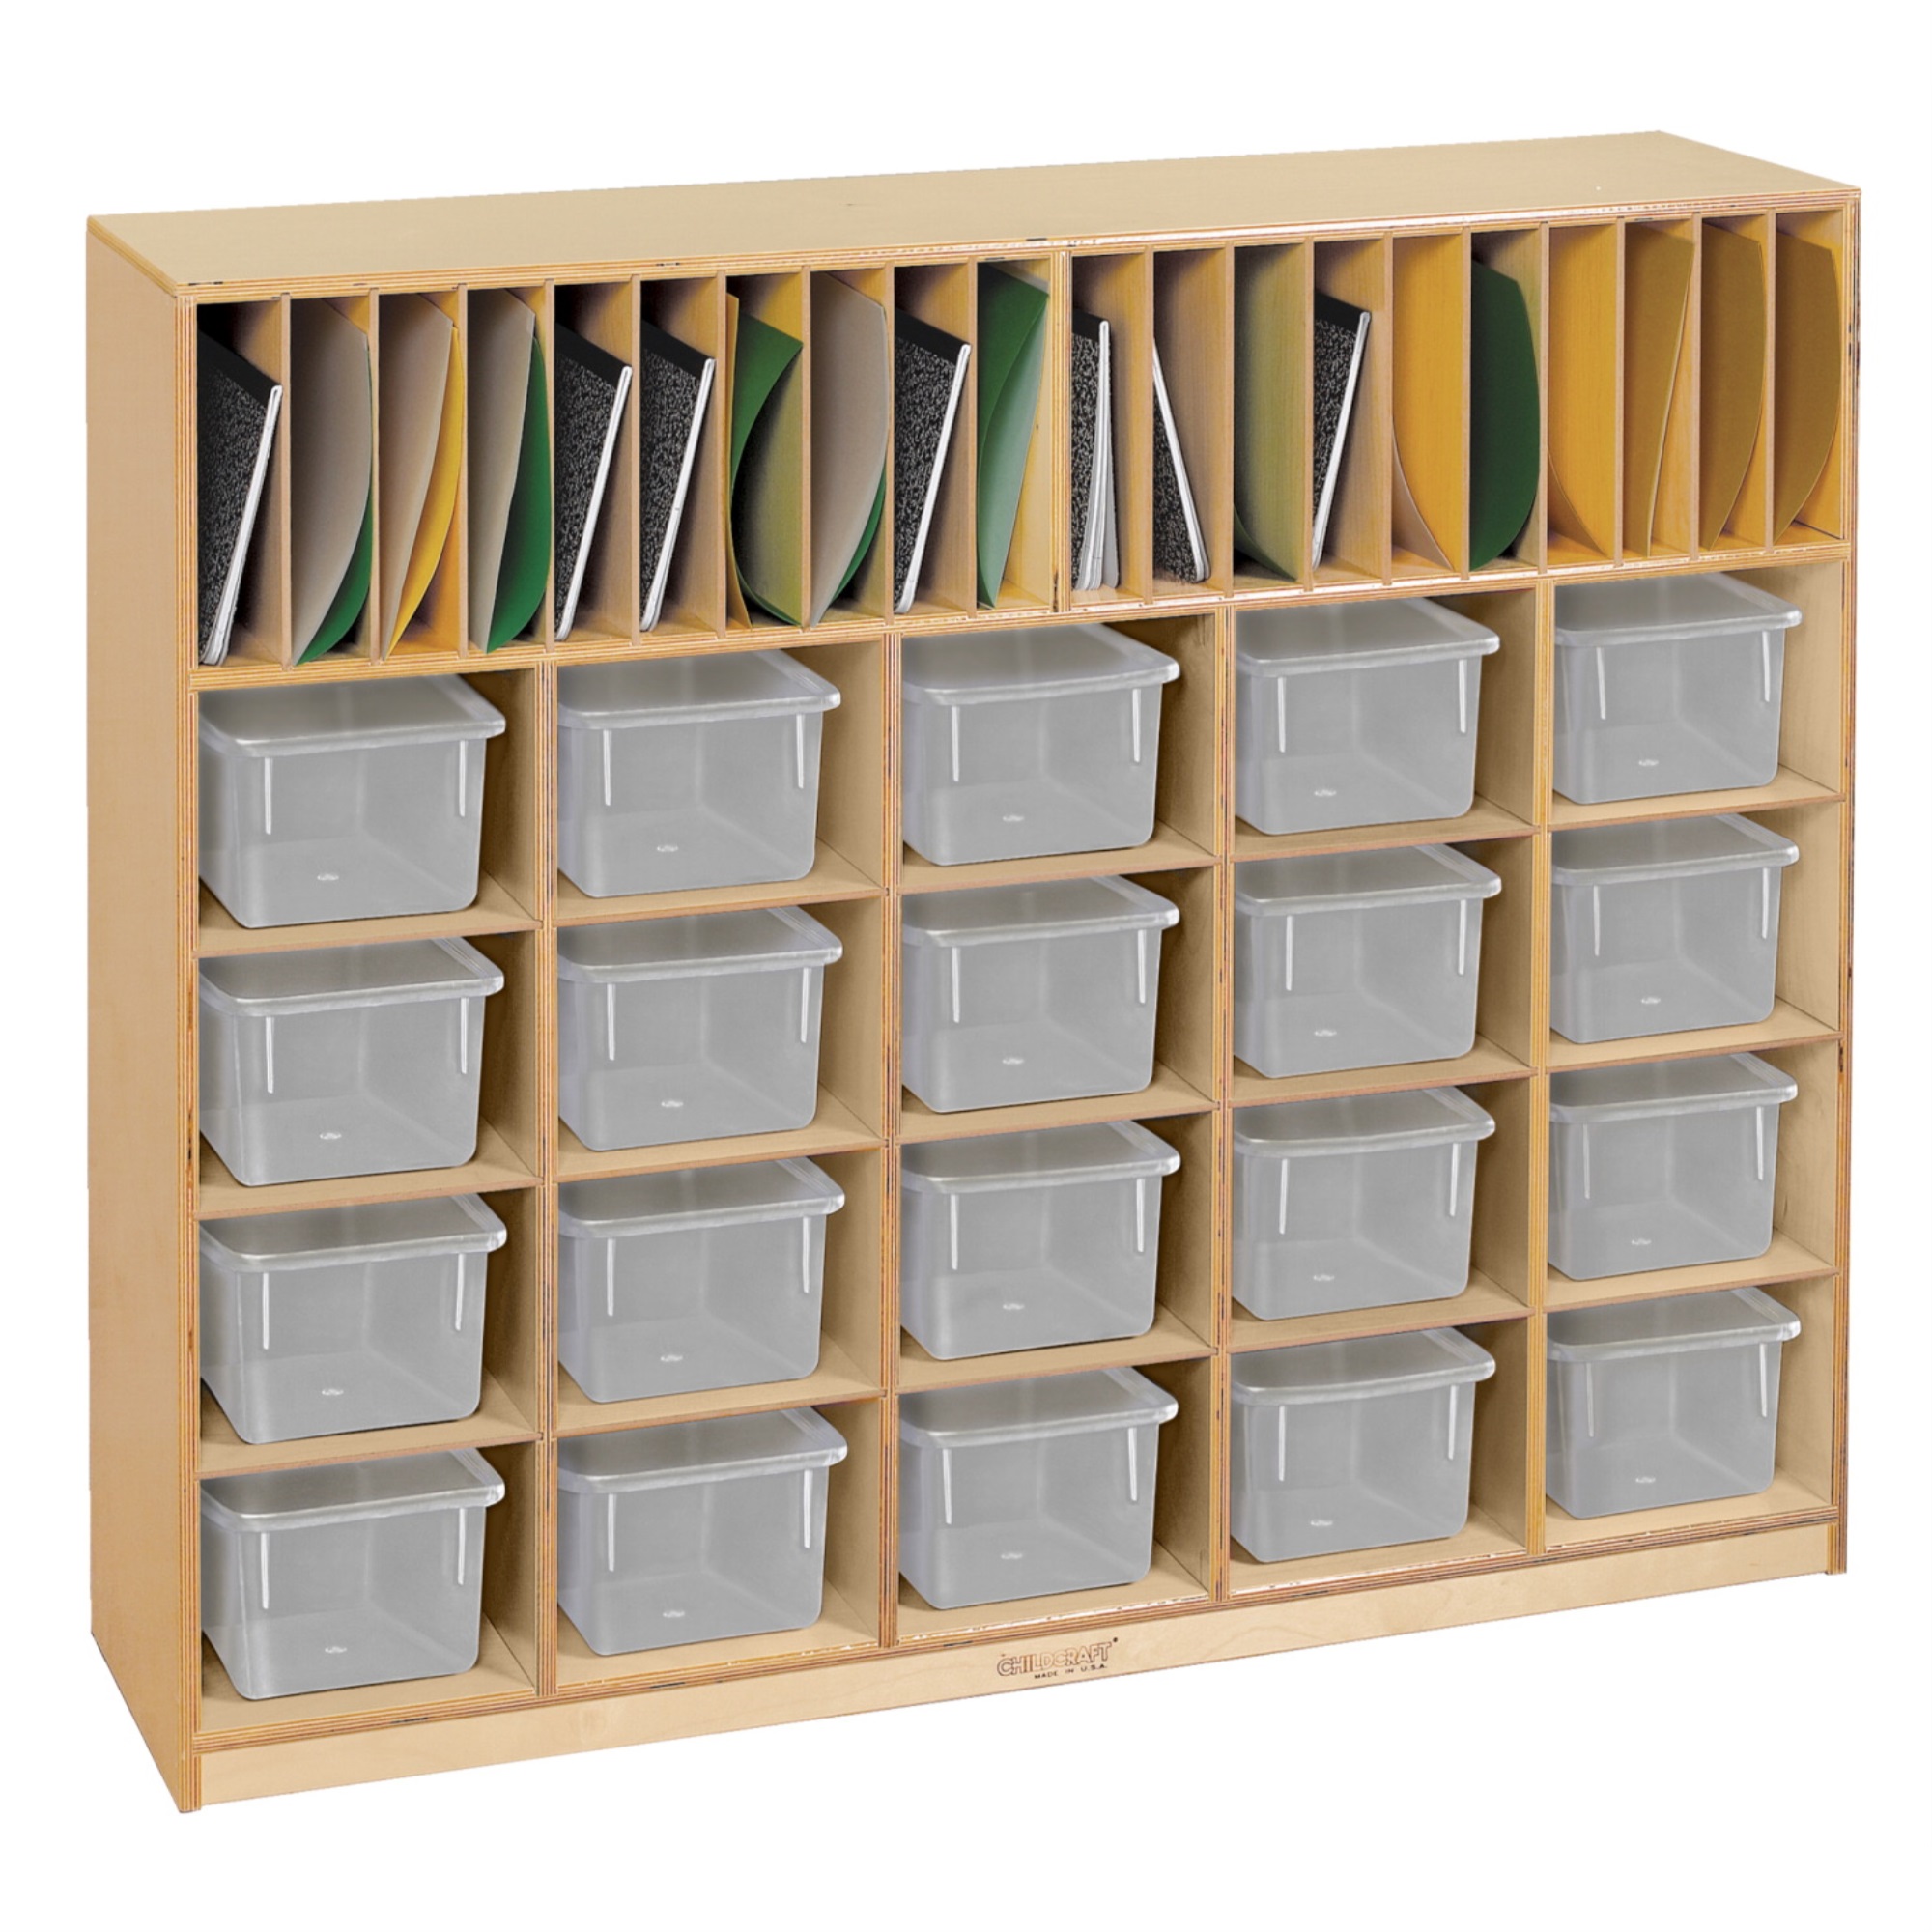 Childcraft Folder and Tray Cubby Unit, 20 Clear Trays, 47-3/4 x 13 x 42 Inches